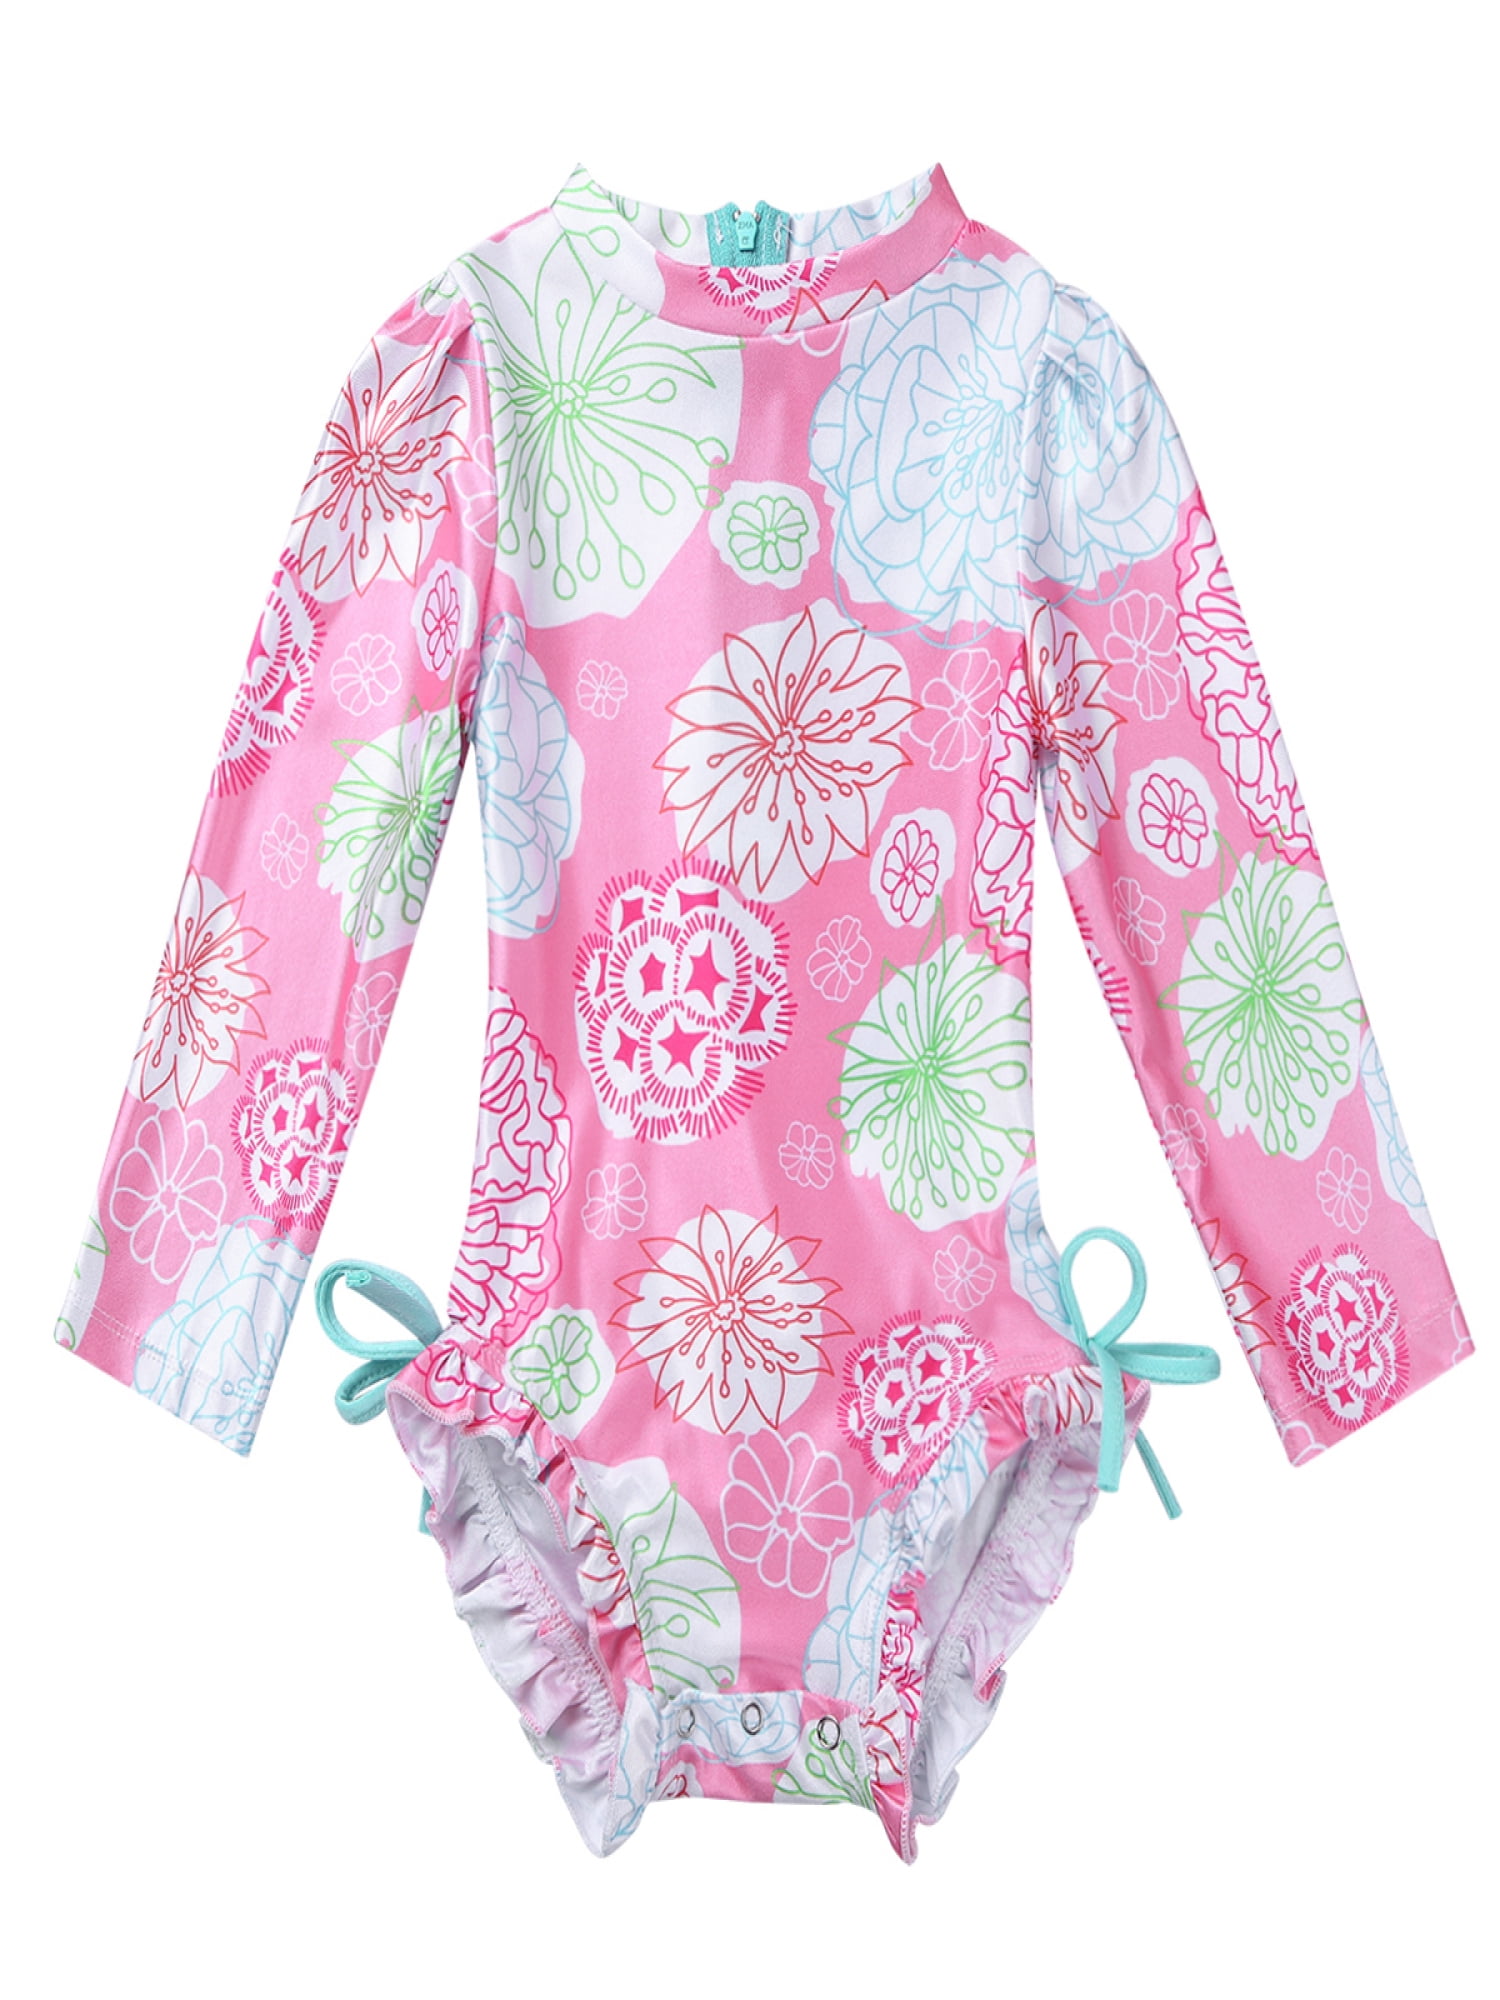 YONGHS Infant Baby Girls Long Sleeves Ruffled Swimsuit One-piece ...